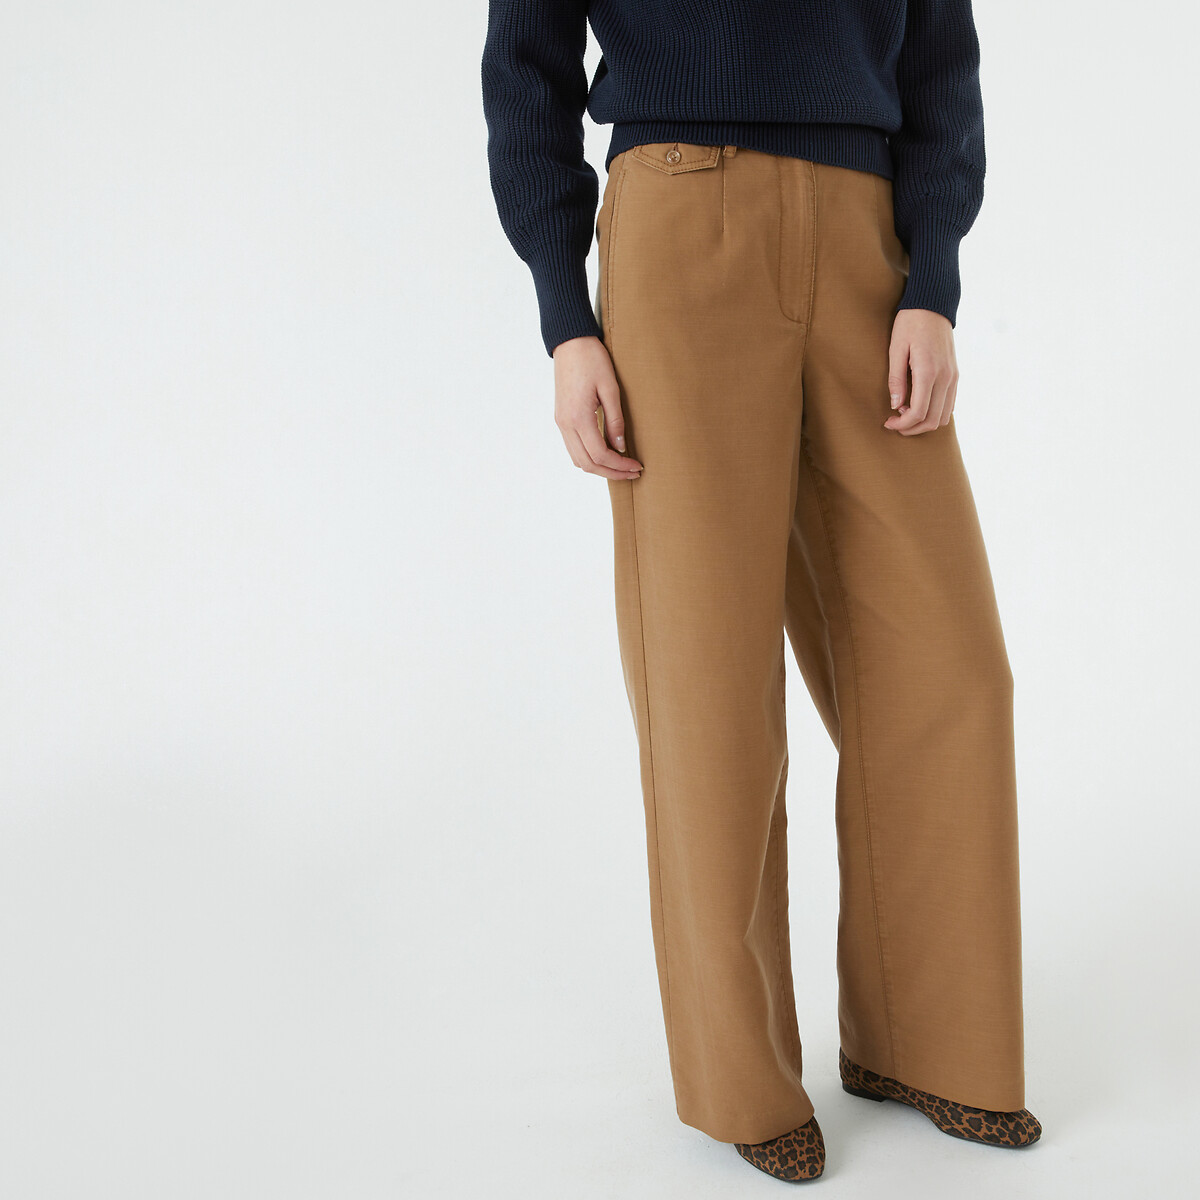 Wide Leg Trousers in Cotton Mix, Length 30.5"